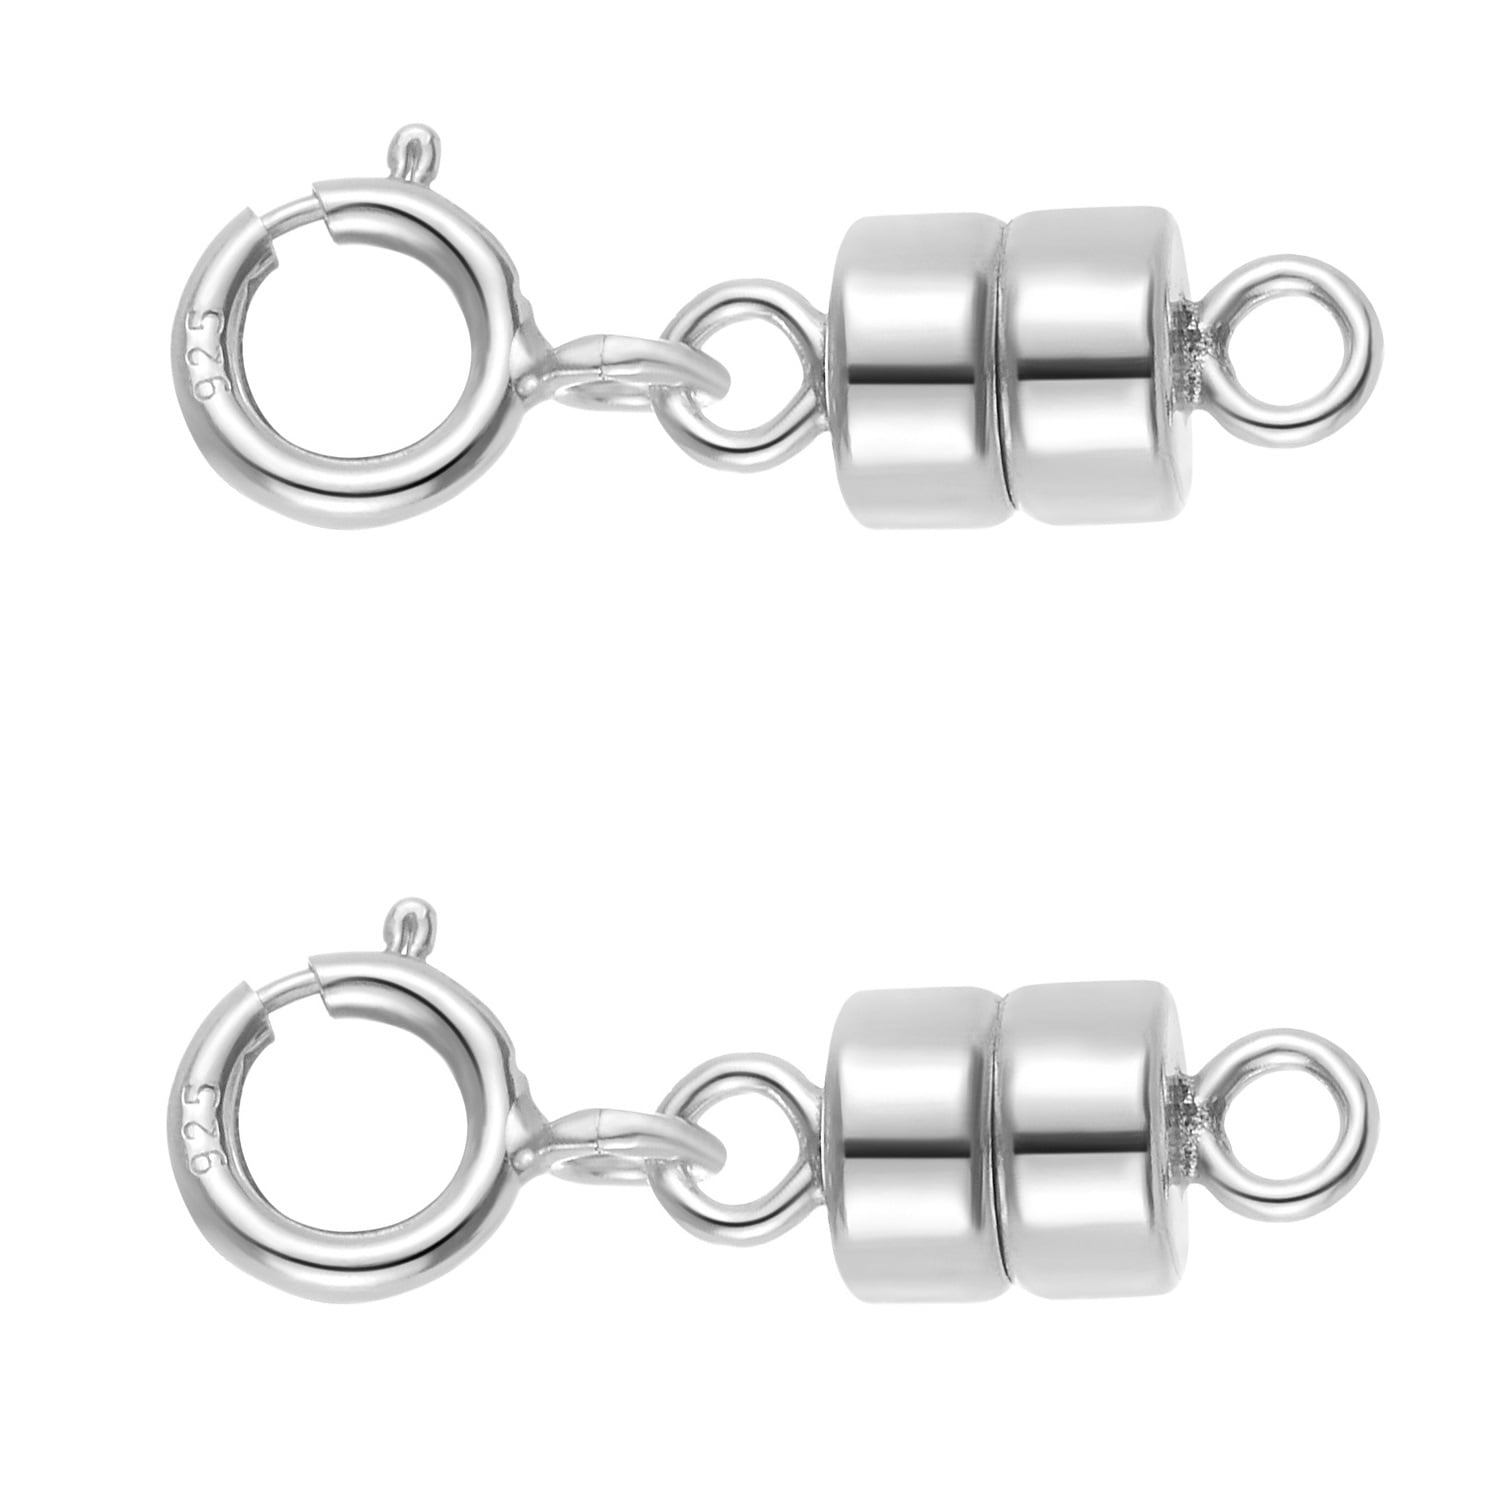 Qulltk 925 Sterling Silver Magnetic Necklace Clasps and Closures,Mini  Bracelets Clasp Converter Gold and Silver Chain Extender for Jewelry Making  Supplies 2Pcs Silver